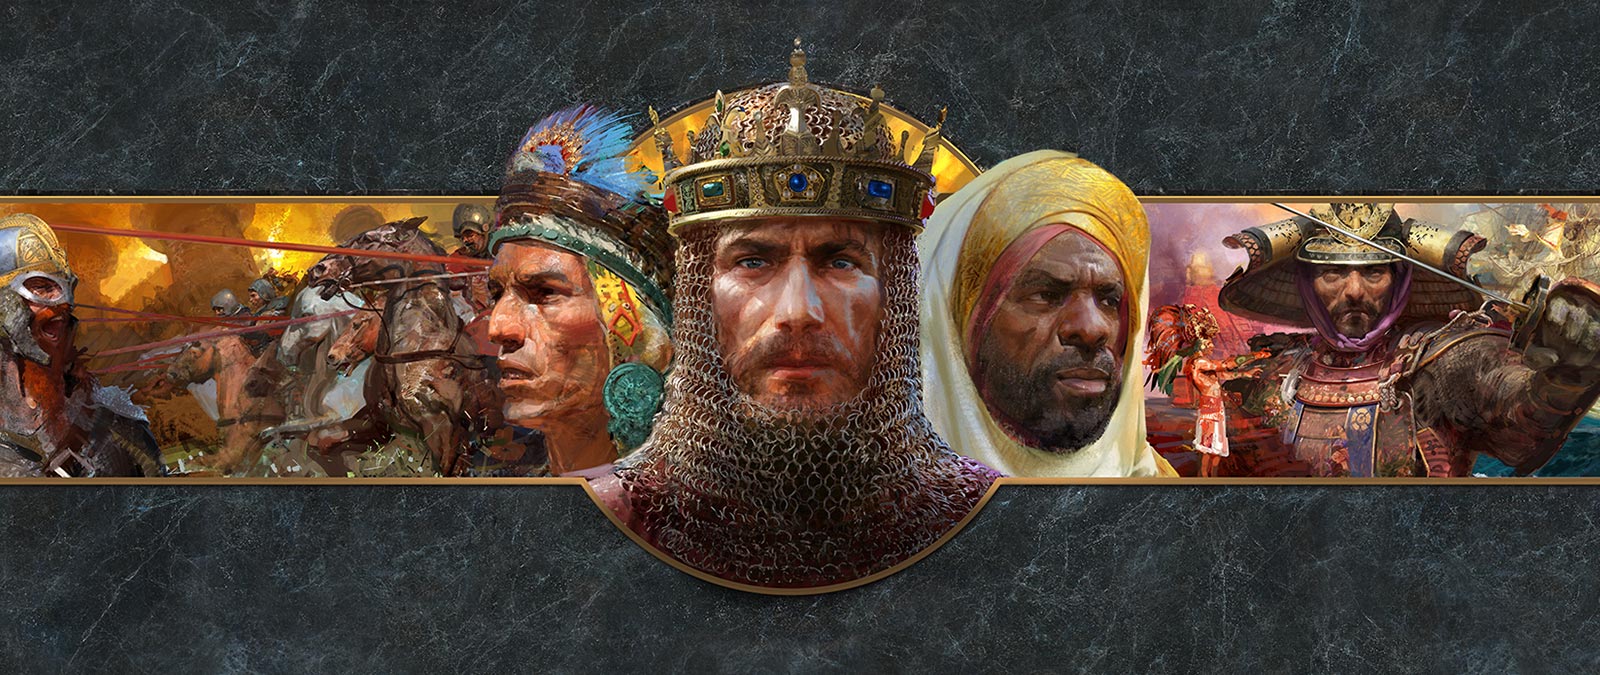 The headshots of leaders from different civilisations are shown in front of scenes of battle.